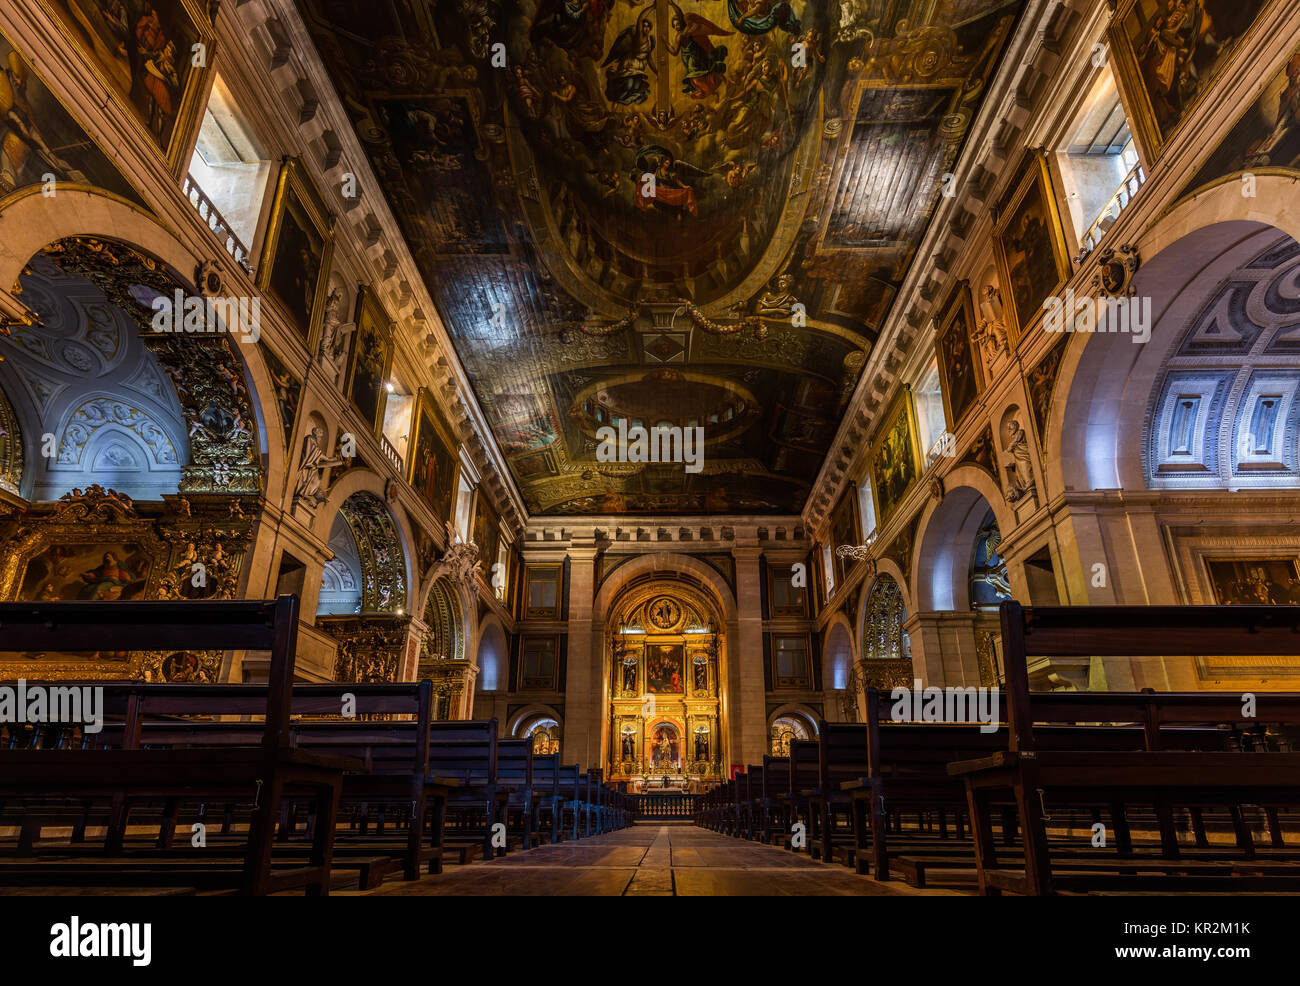 Lisbon, Portugal, August 6, 2017: Interior of the 16th century Church of Saint Roch. It was the earliest Jesuit church in the Portuguese world, and on Stock Photo